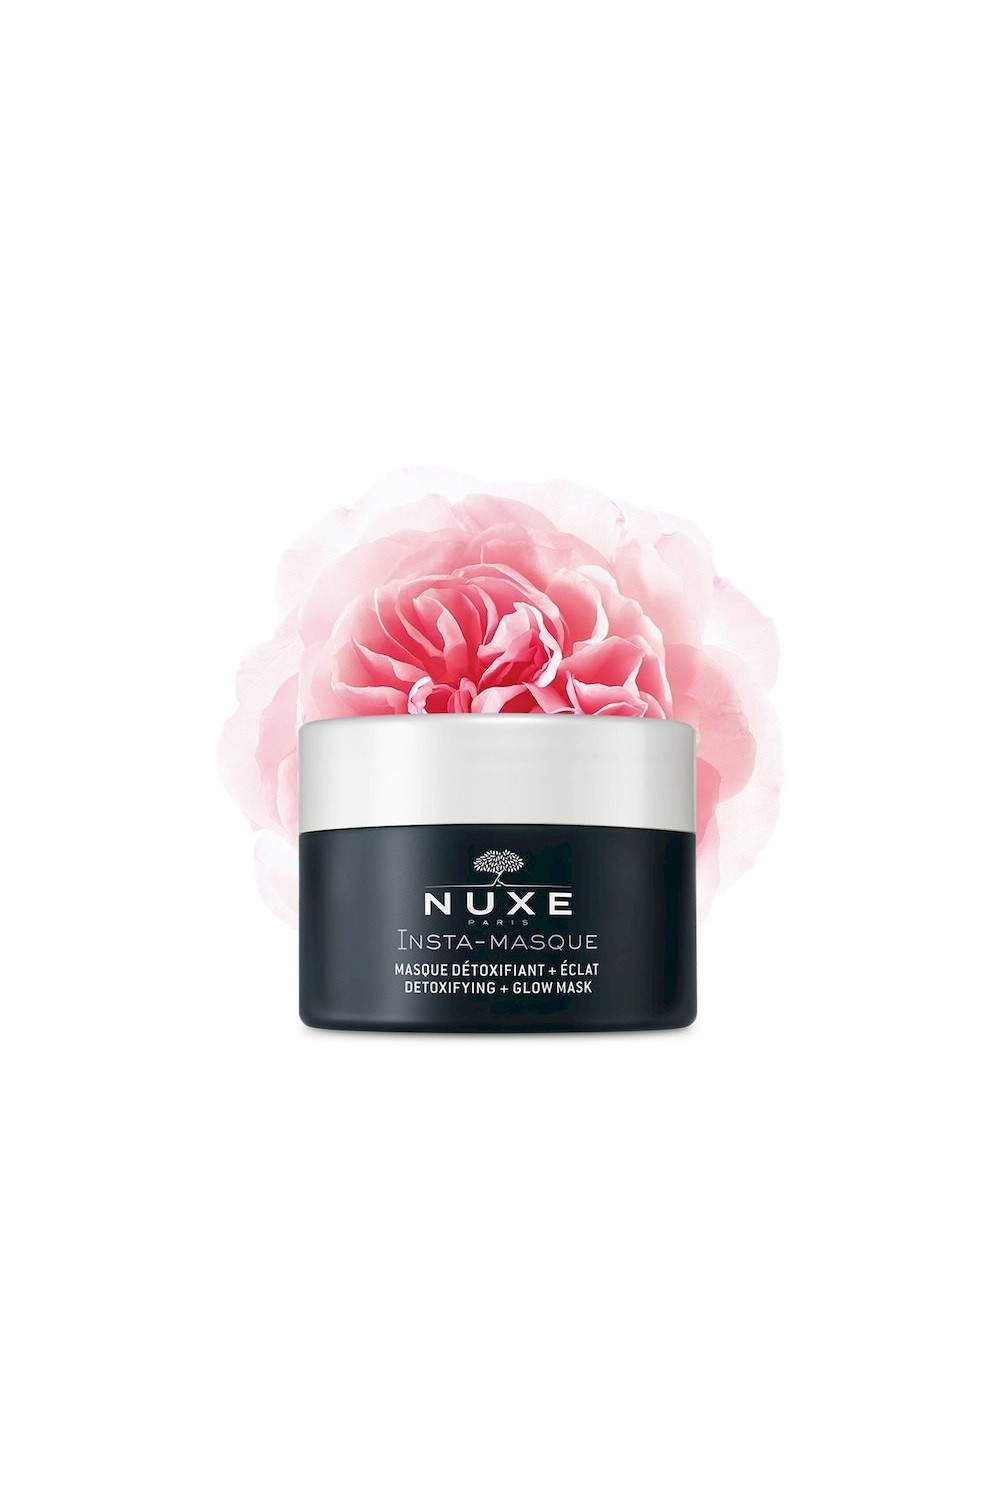 Nuxe Insta-Masque Detoxifying + Glow Mask Rose And Carbon 50ml